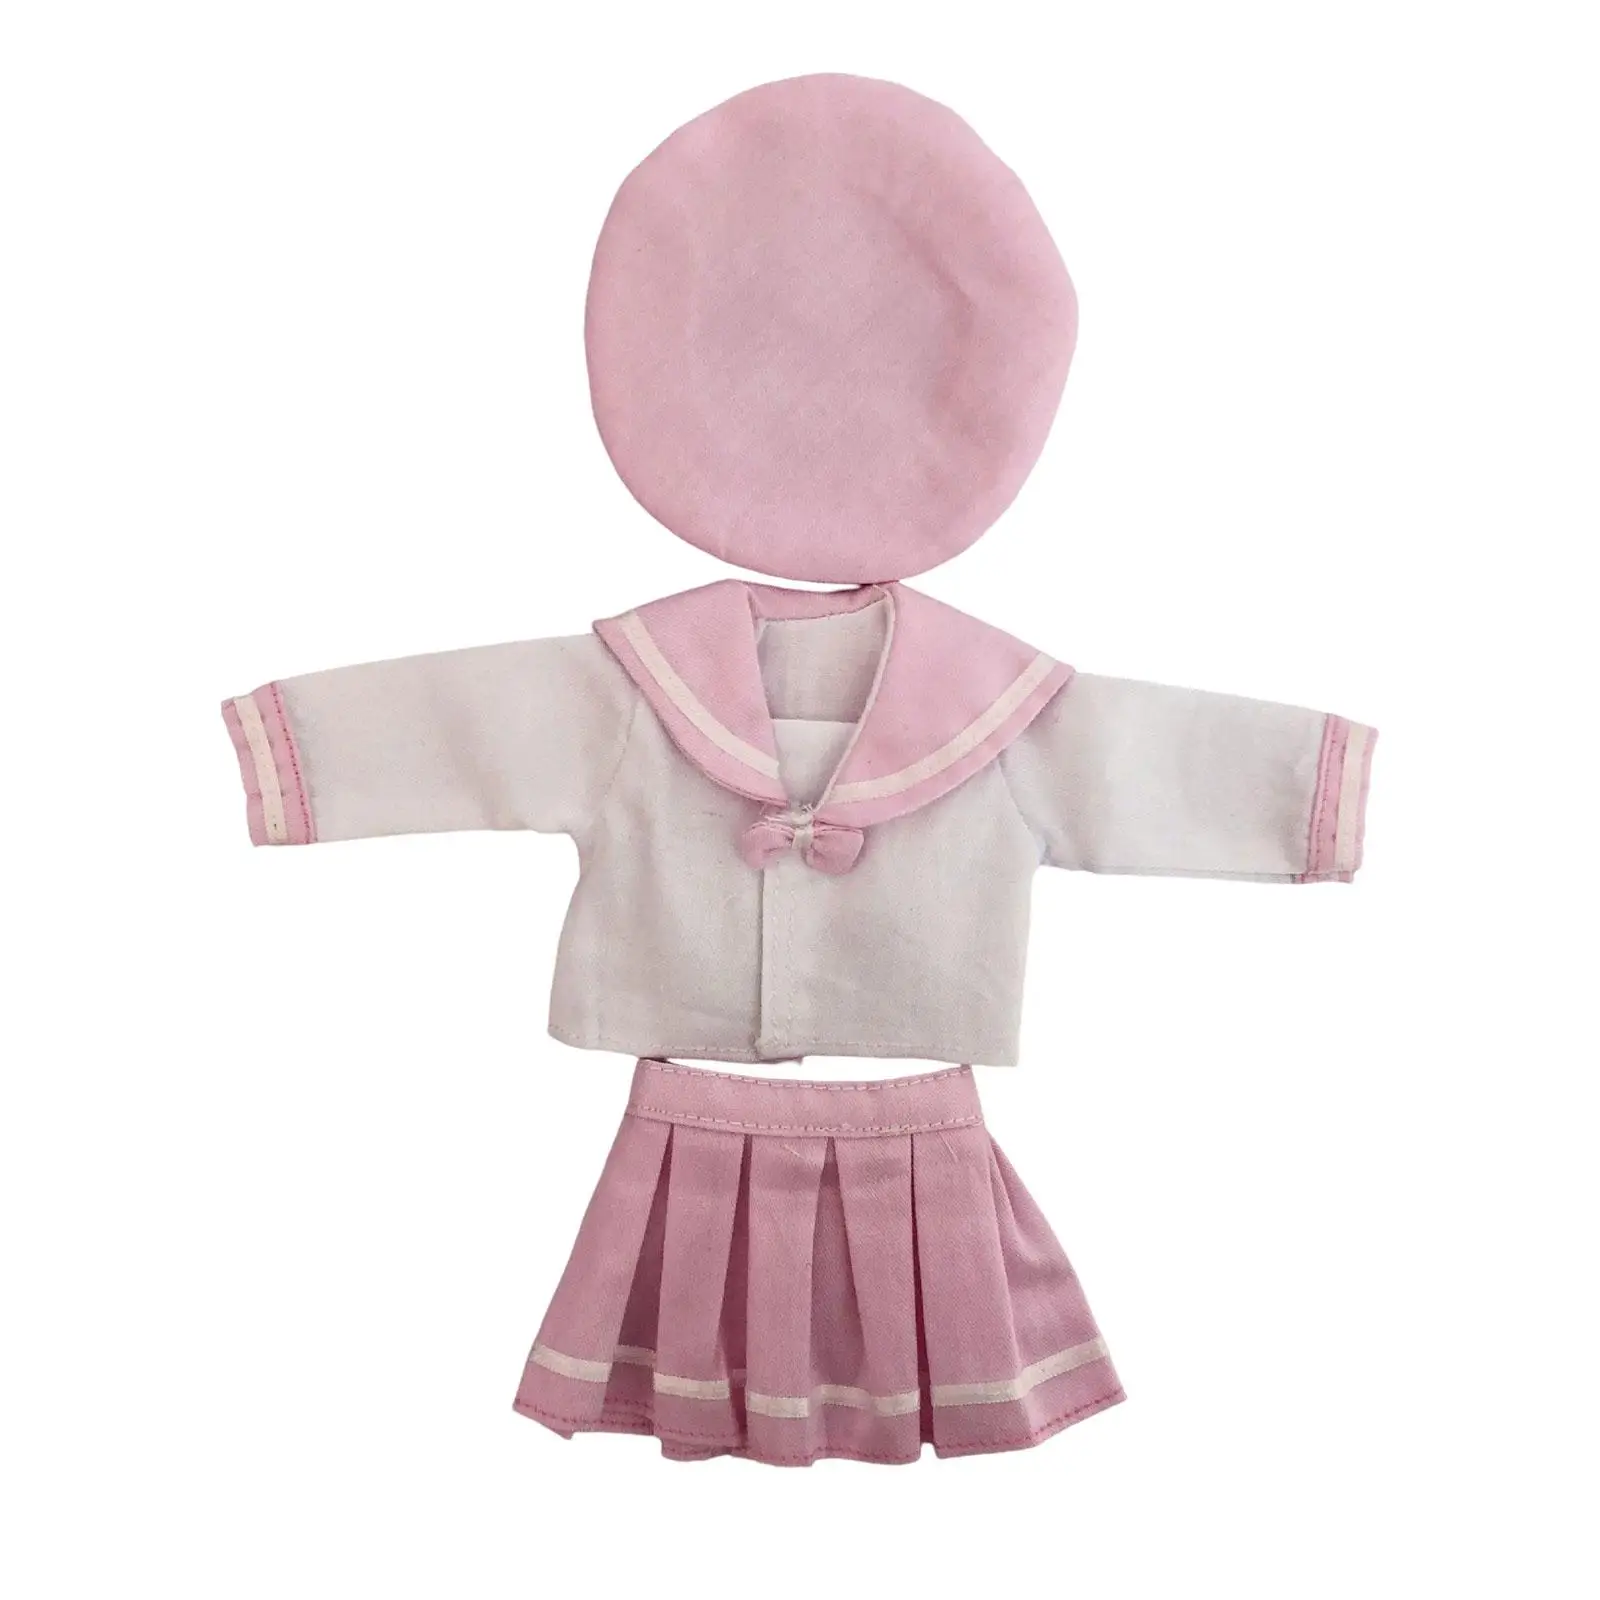 Doll Clothes Dress Set Daily Wear Clothing Uniforms Costume Pleated Skirt for 1/6 12inch Baby Doll Girl Toy Birthday Gift